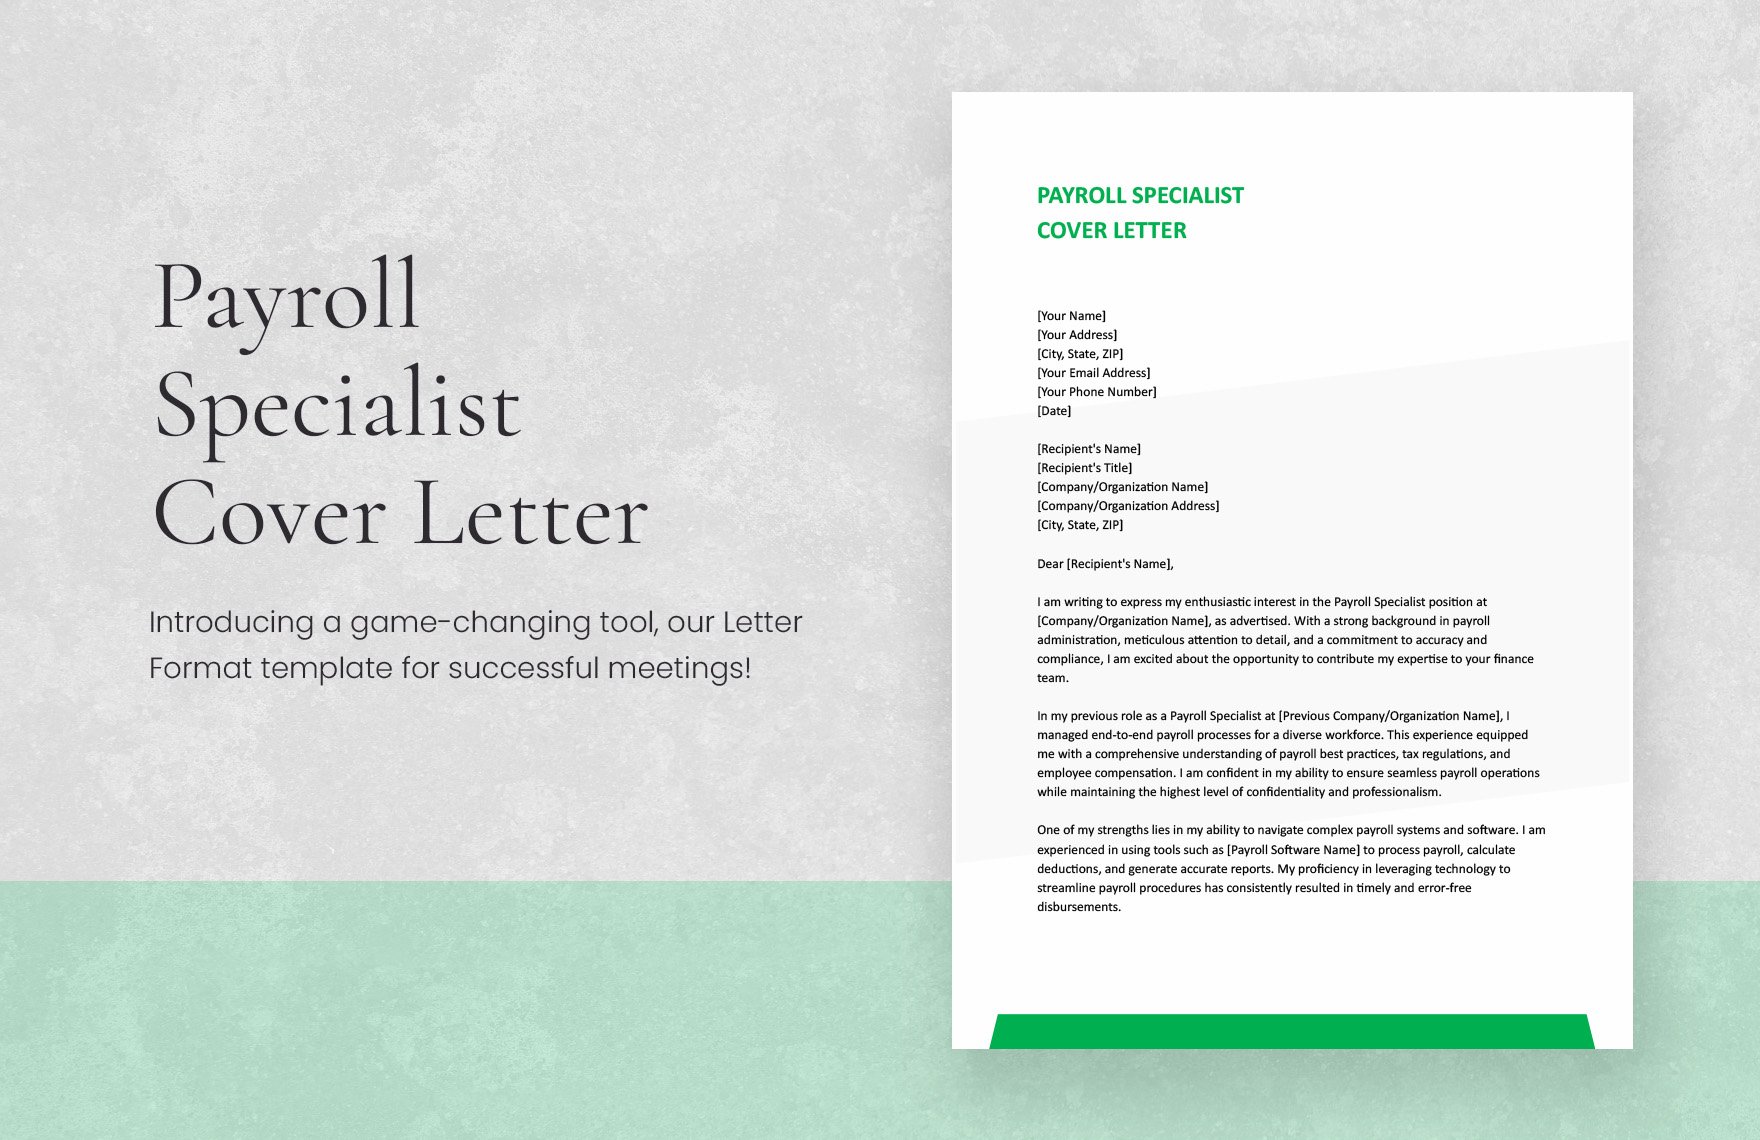 Payroll Specialist Cover Letter